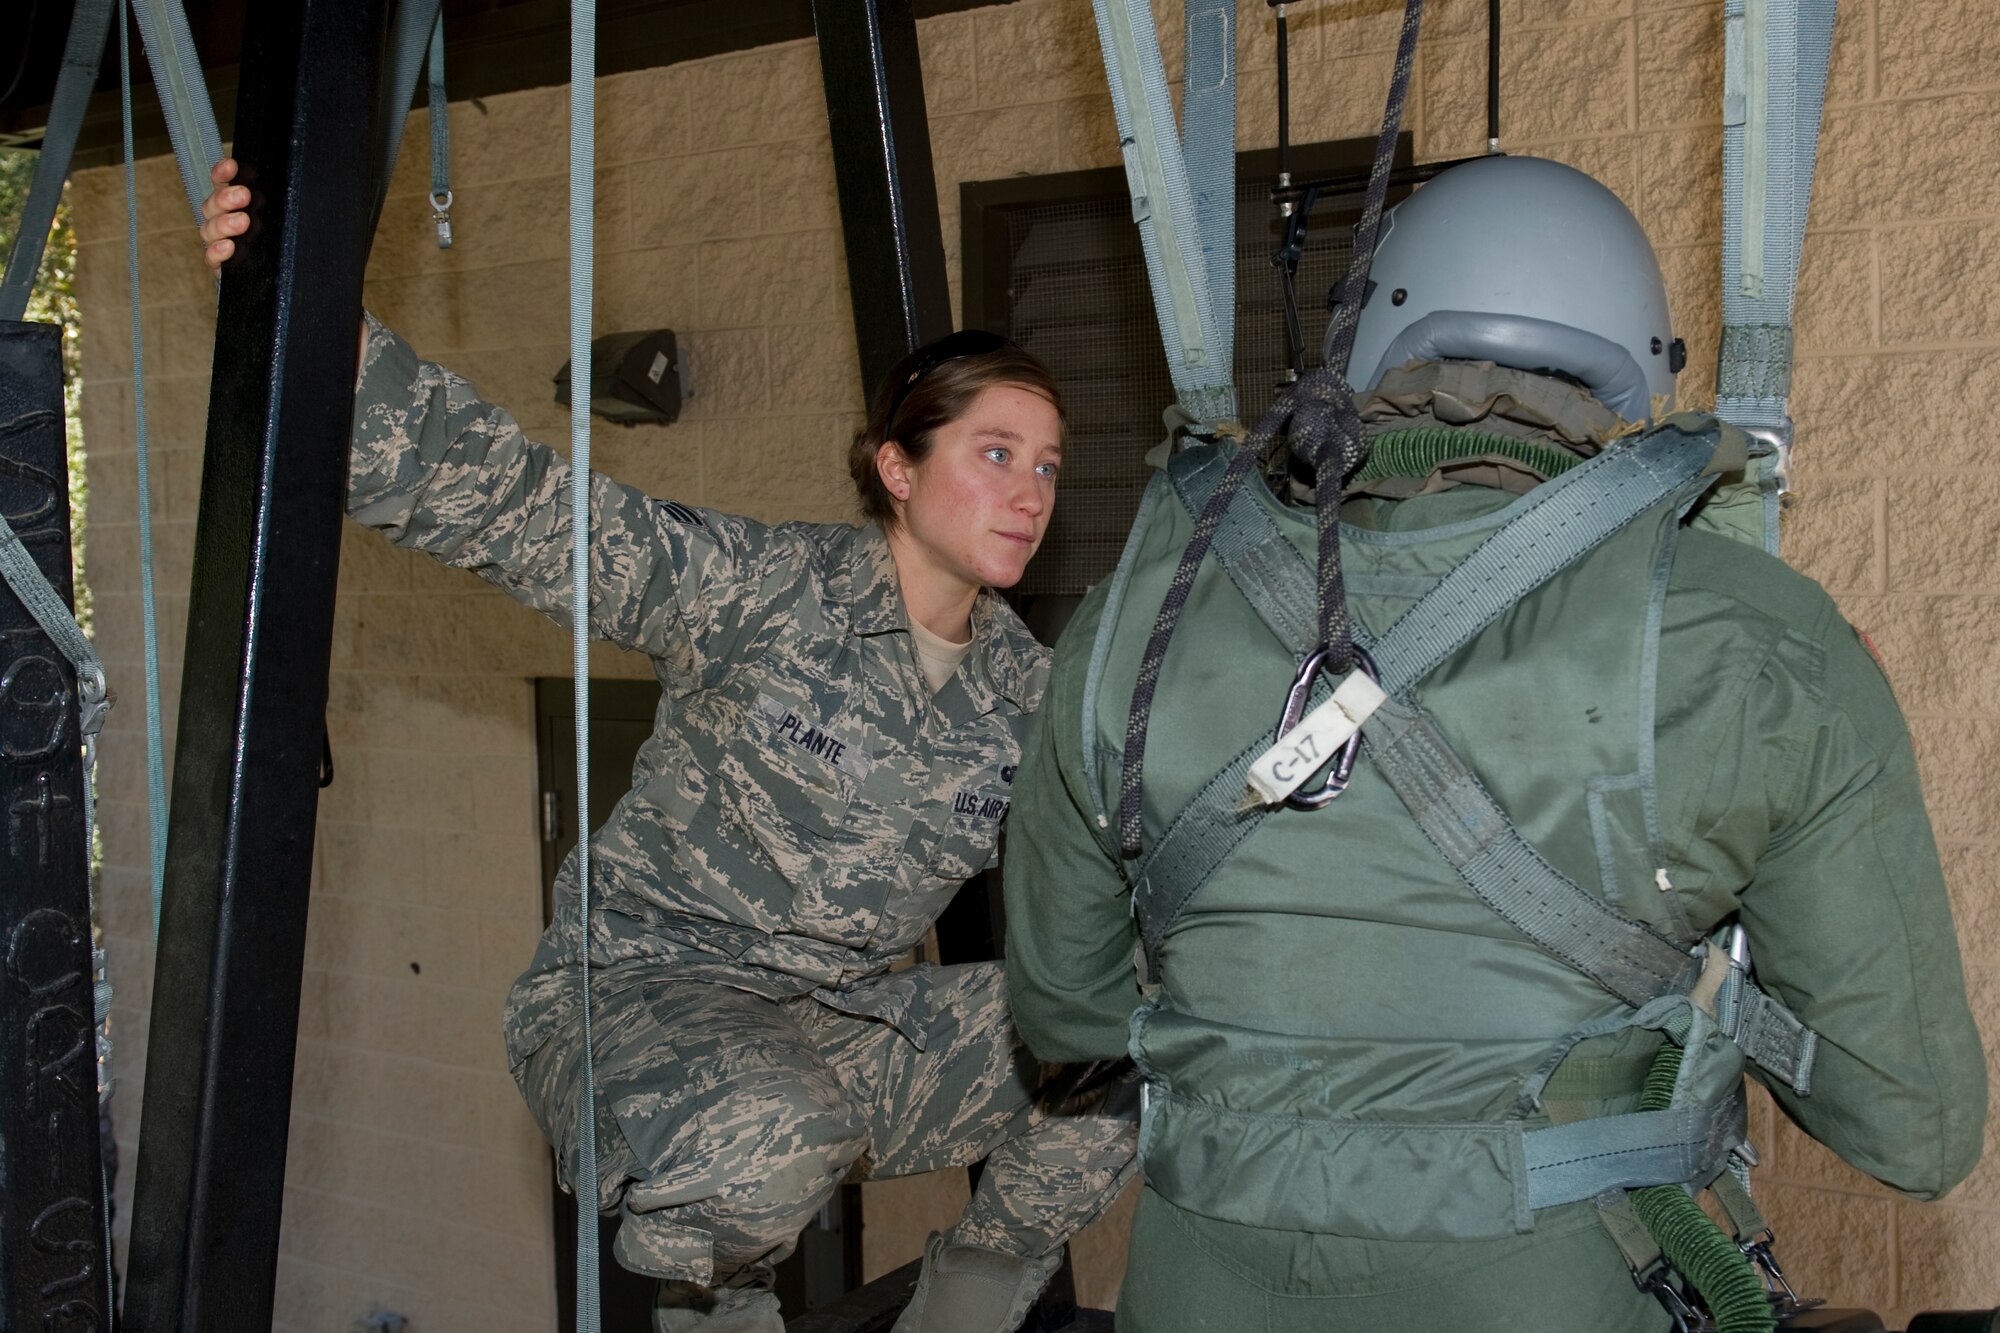 Senior Airman Charlene Plante, 1st Special Operations Support Squadron survival, evasion, resistance and escape instructor, advises an aircrew member on the proper way to escape a parachute during a SERE refresher course at Hurlburt Field, Fla., Jan. 14, 2014. Plante is one of about a dozen females who have successfully completed the SERE instructor course. (U.S. Air Force photo/Senior Airman Naomi Griego)